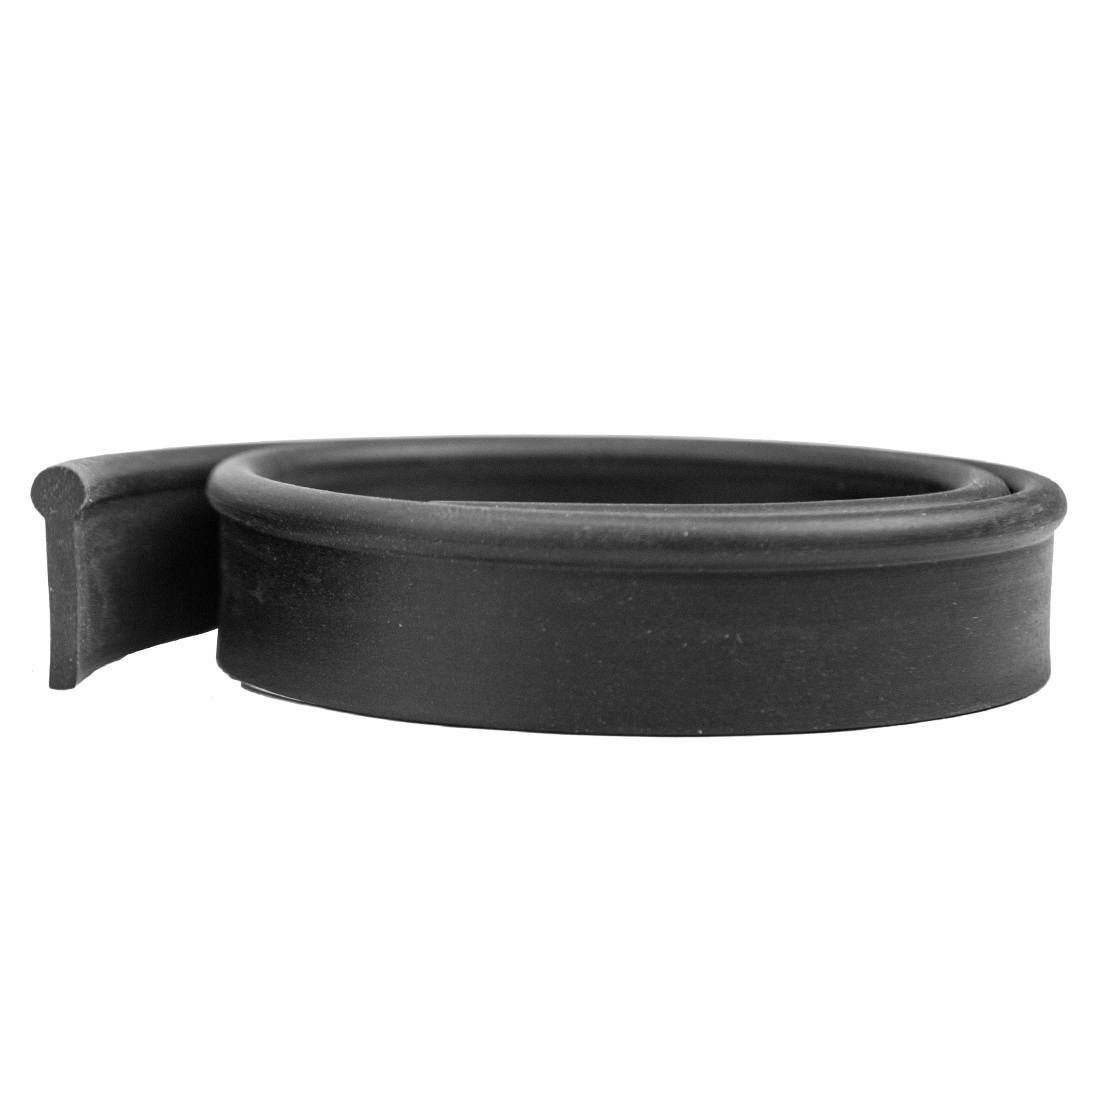 Pulex Squeegee Rubber Front View